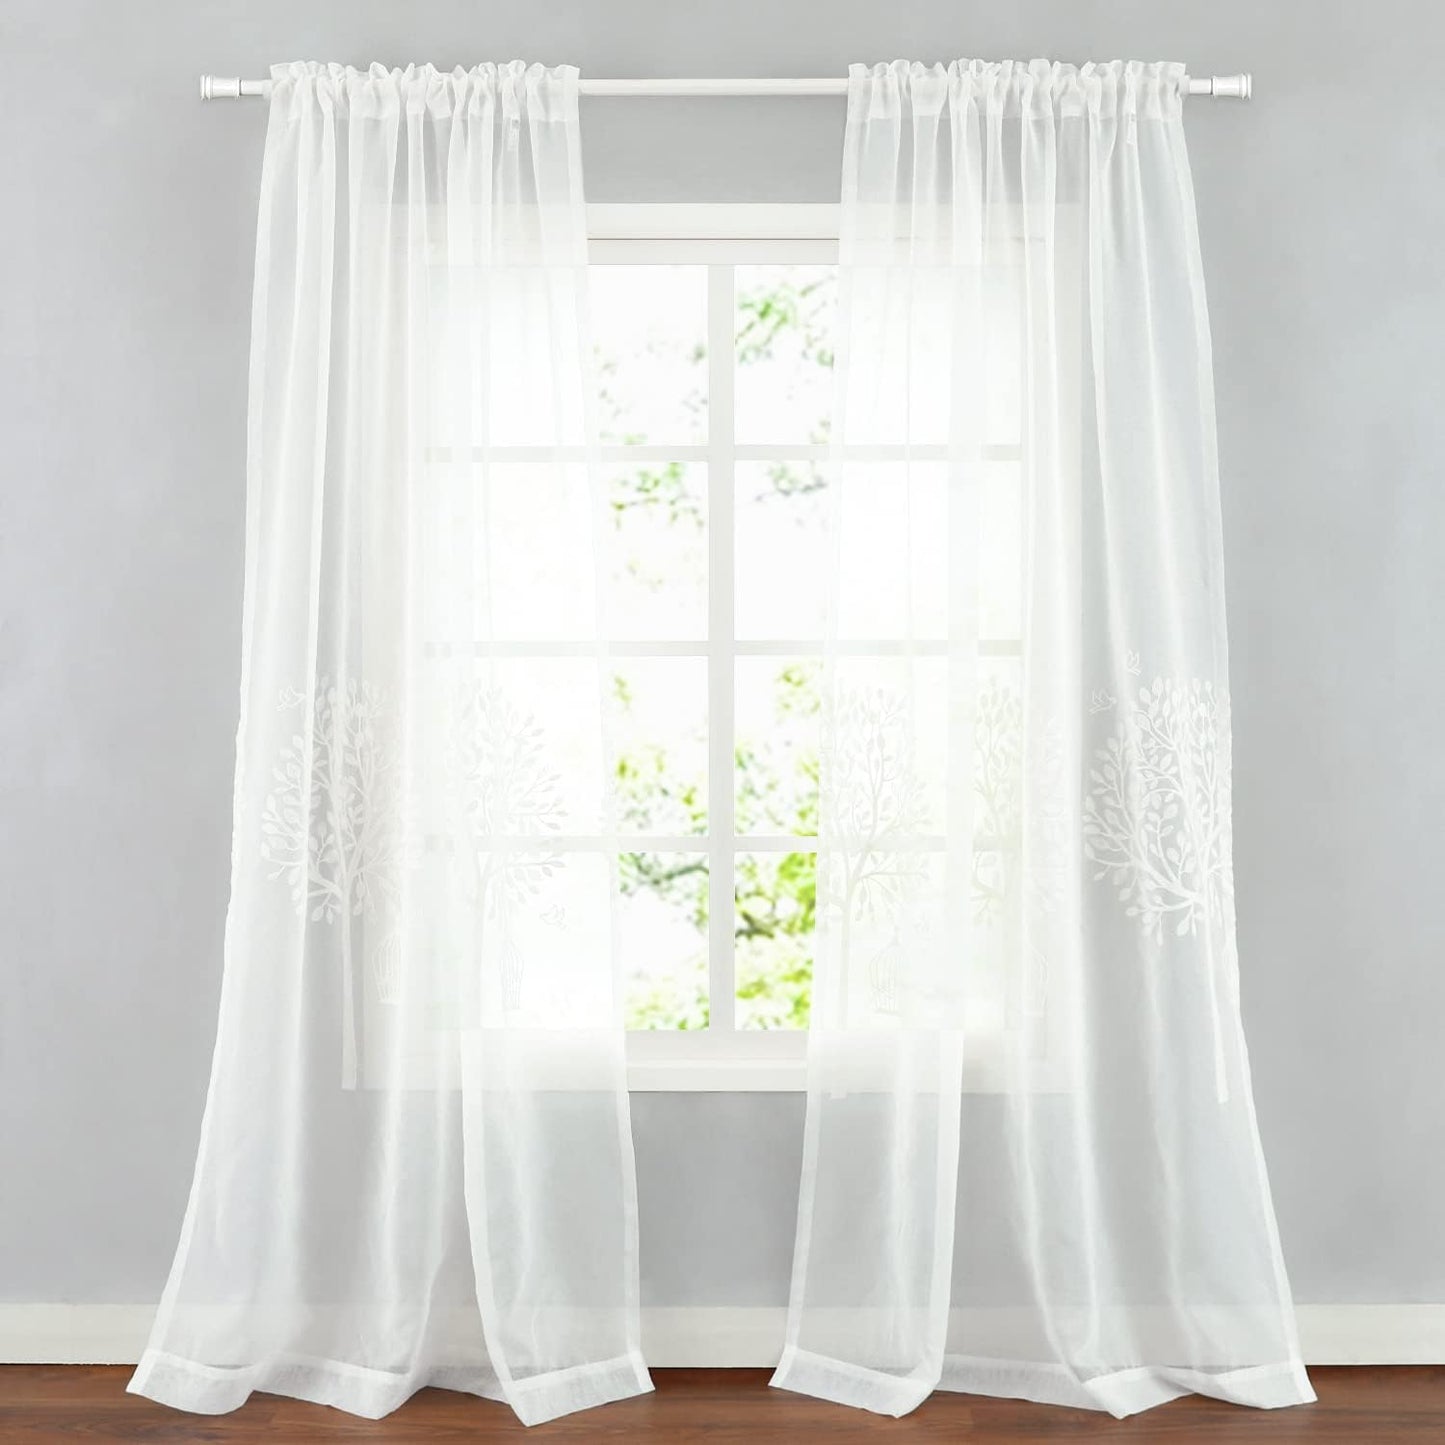 VOGOL Sheer Curtains 84 Inches Long, Trees Embroidered White Sheer Window Curtain for Living Room/Dining Room, Rod Pocket, 52 X 84, 2 Panels  YouYee Matching Sheer W60Xl106 